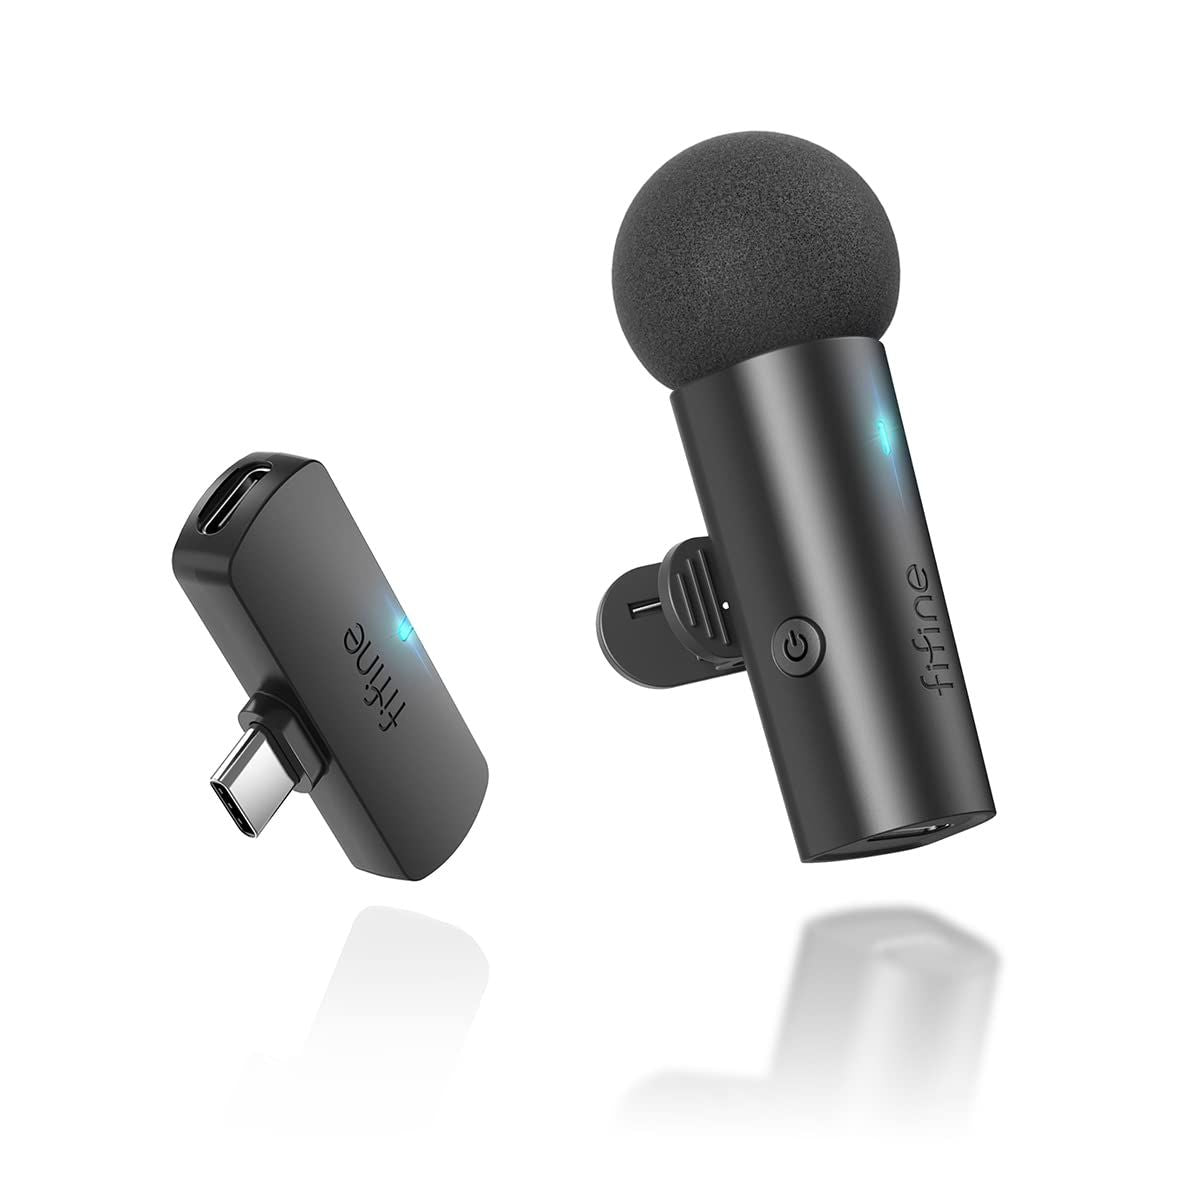 Fifine K658 Microphone Guide - Apps on Google Play